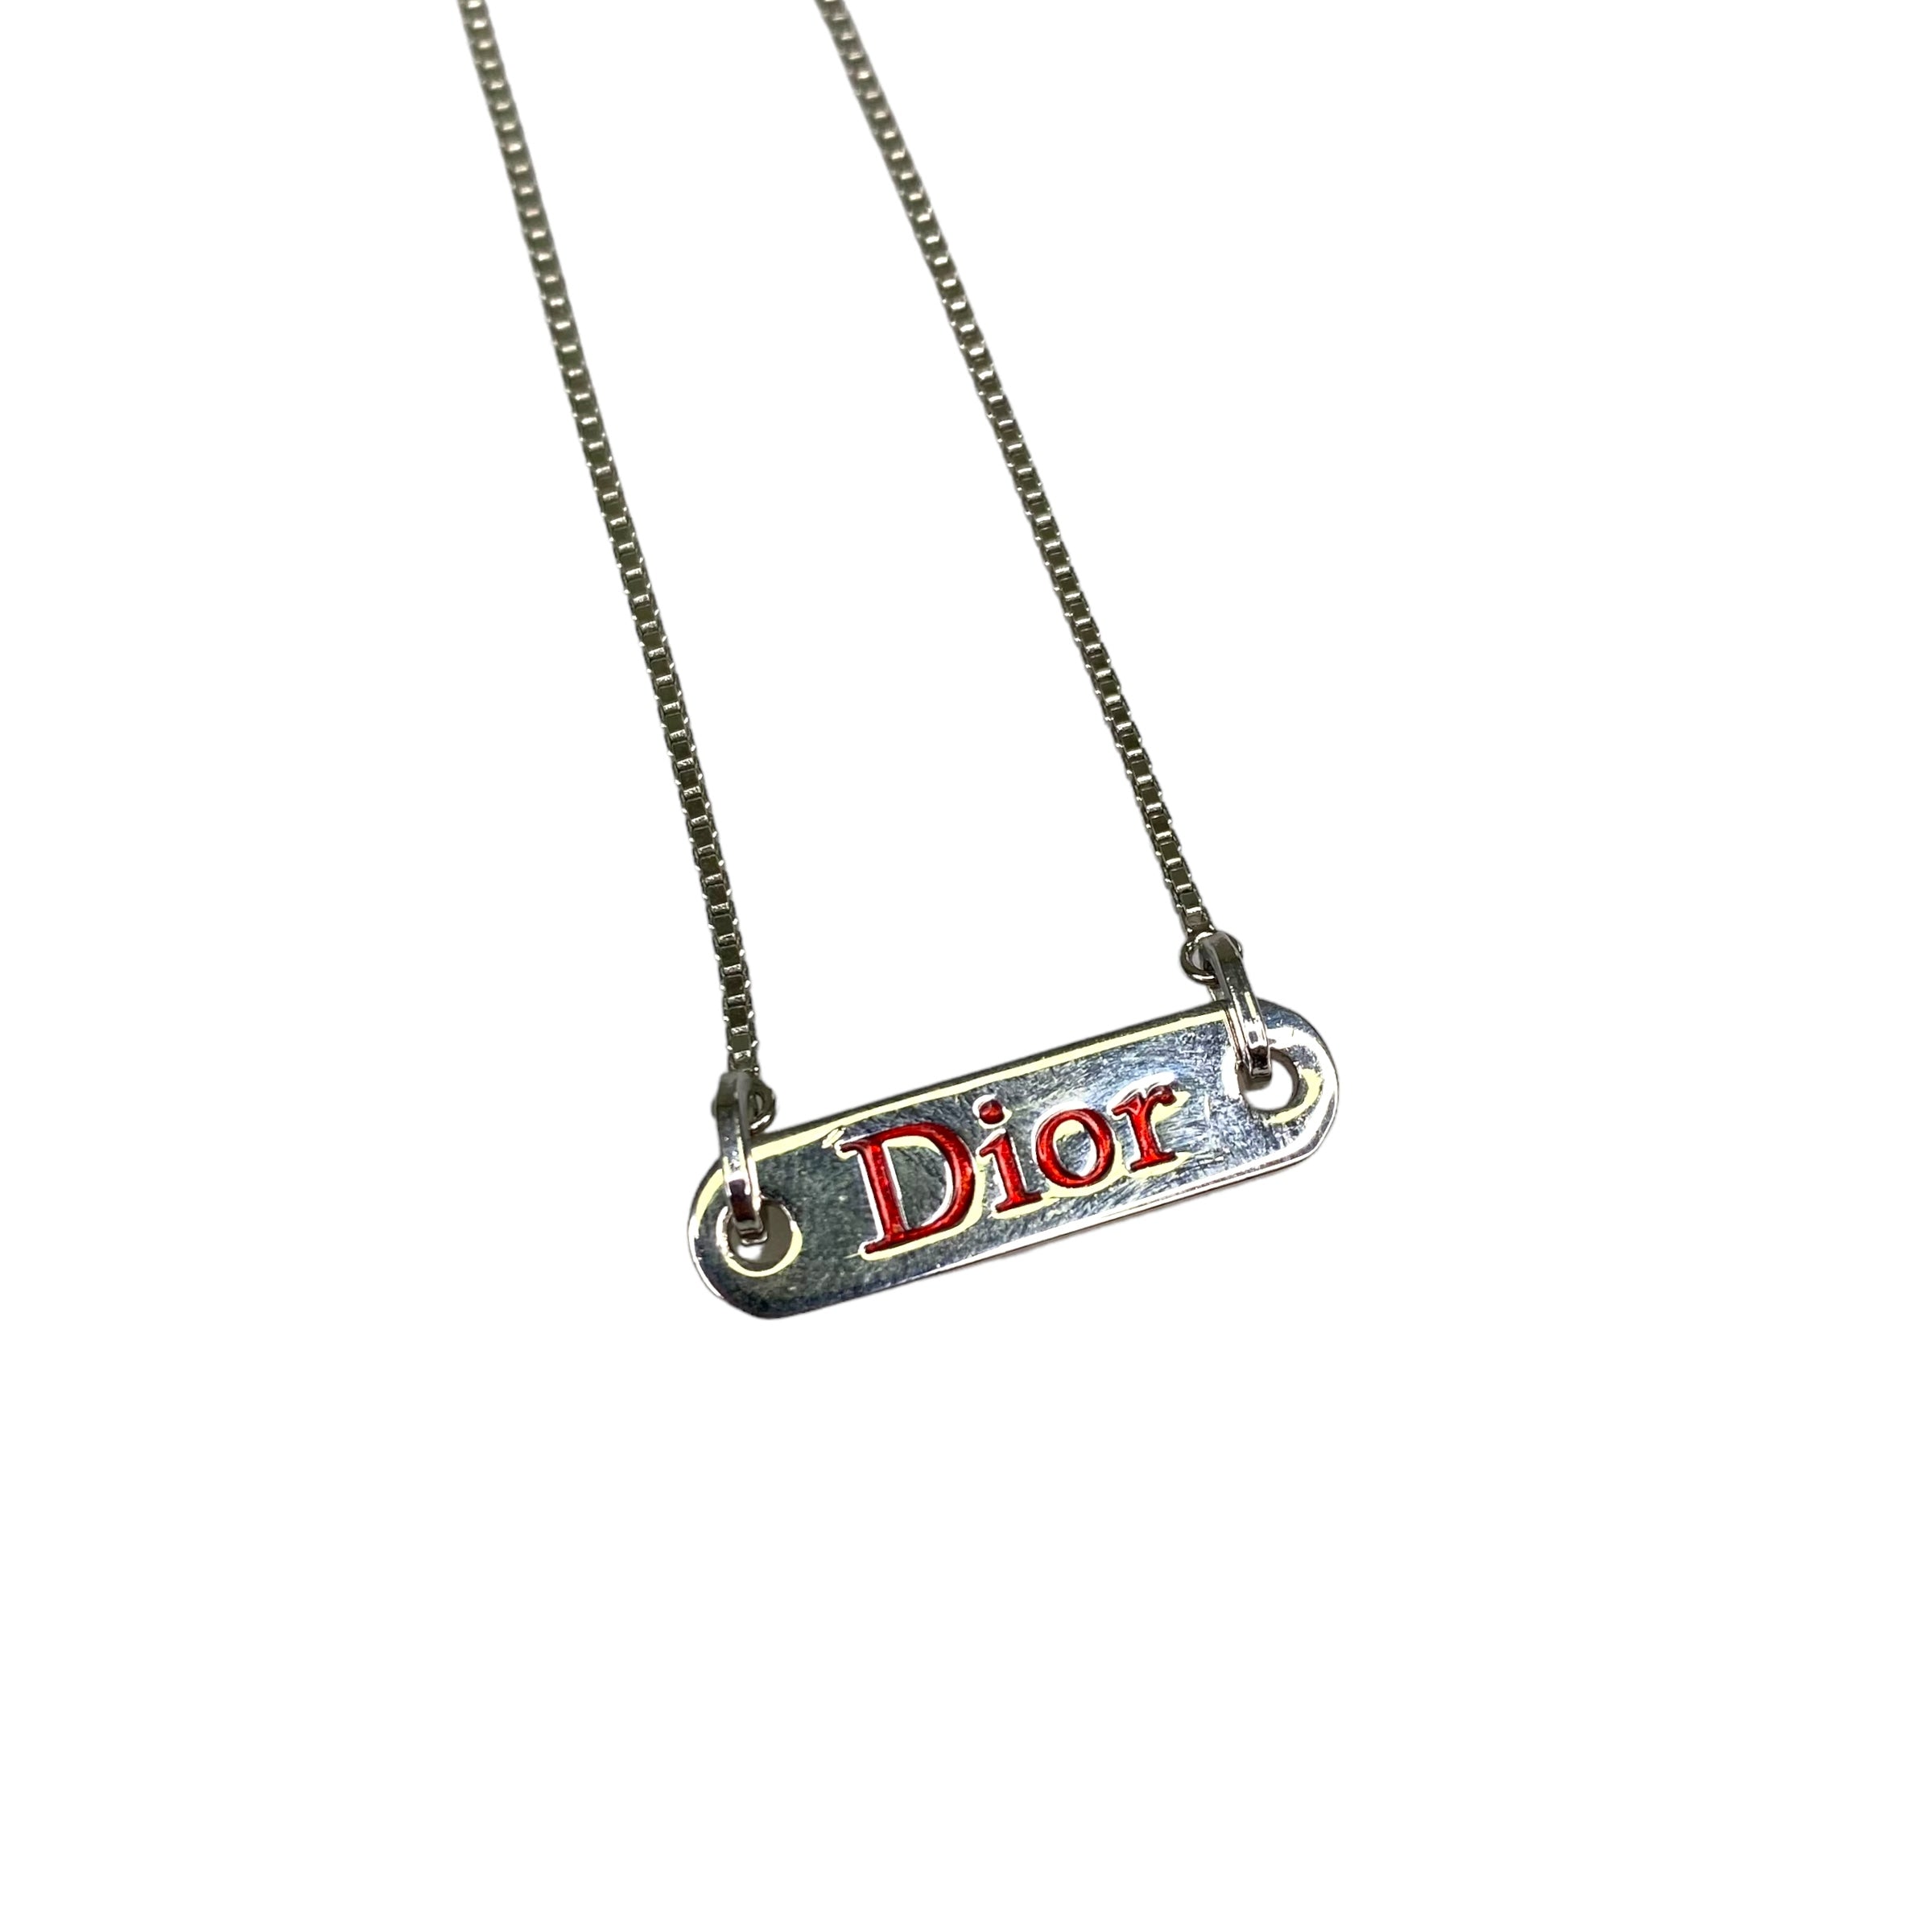 DIOR DEBOSSED PLATE RED SPELLOUT NECKLACE SILVER-PLATED